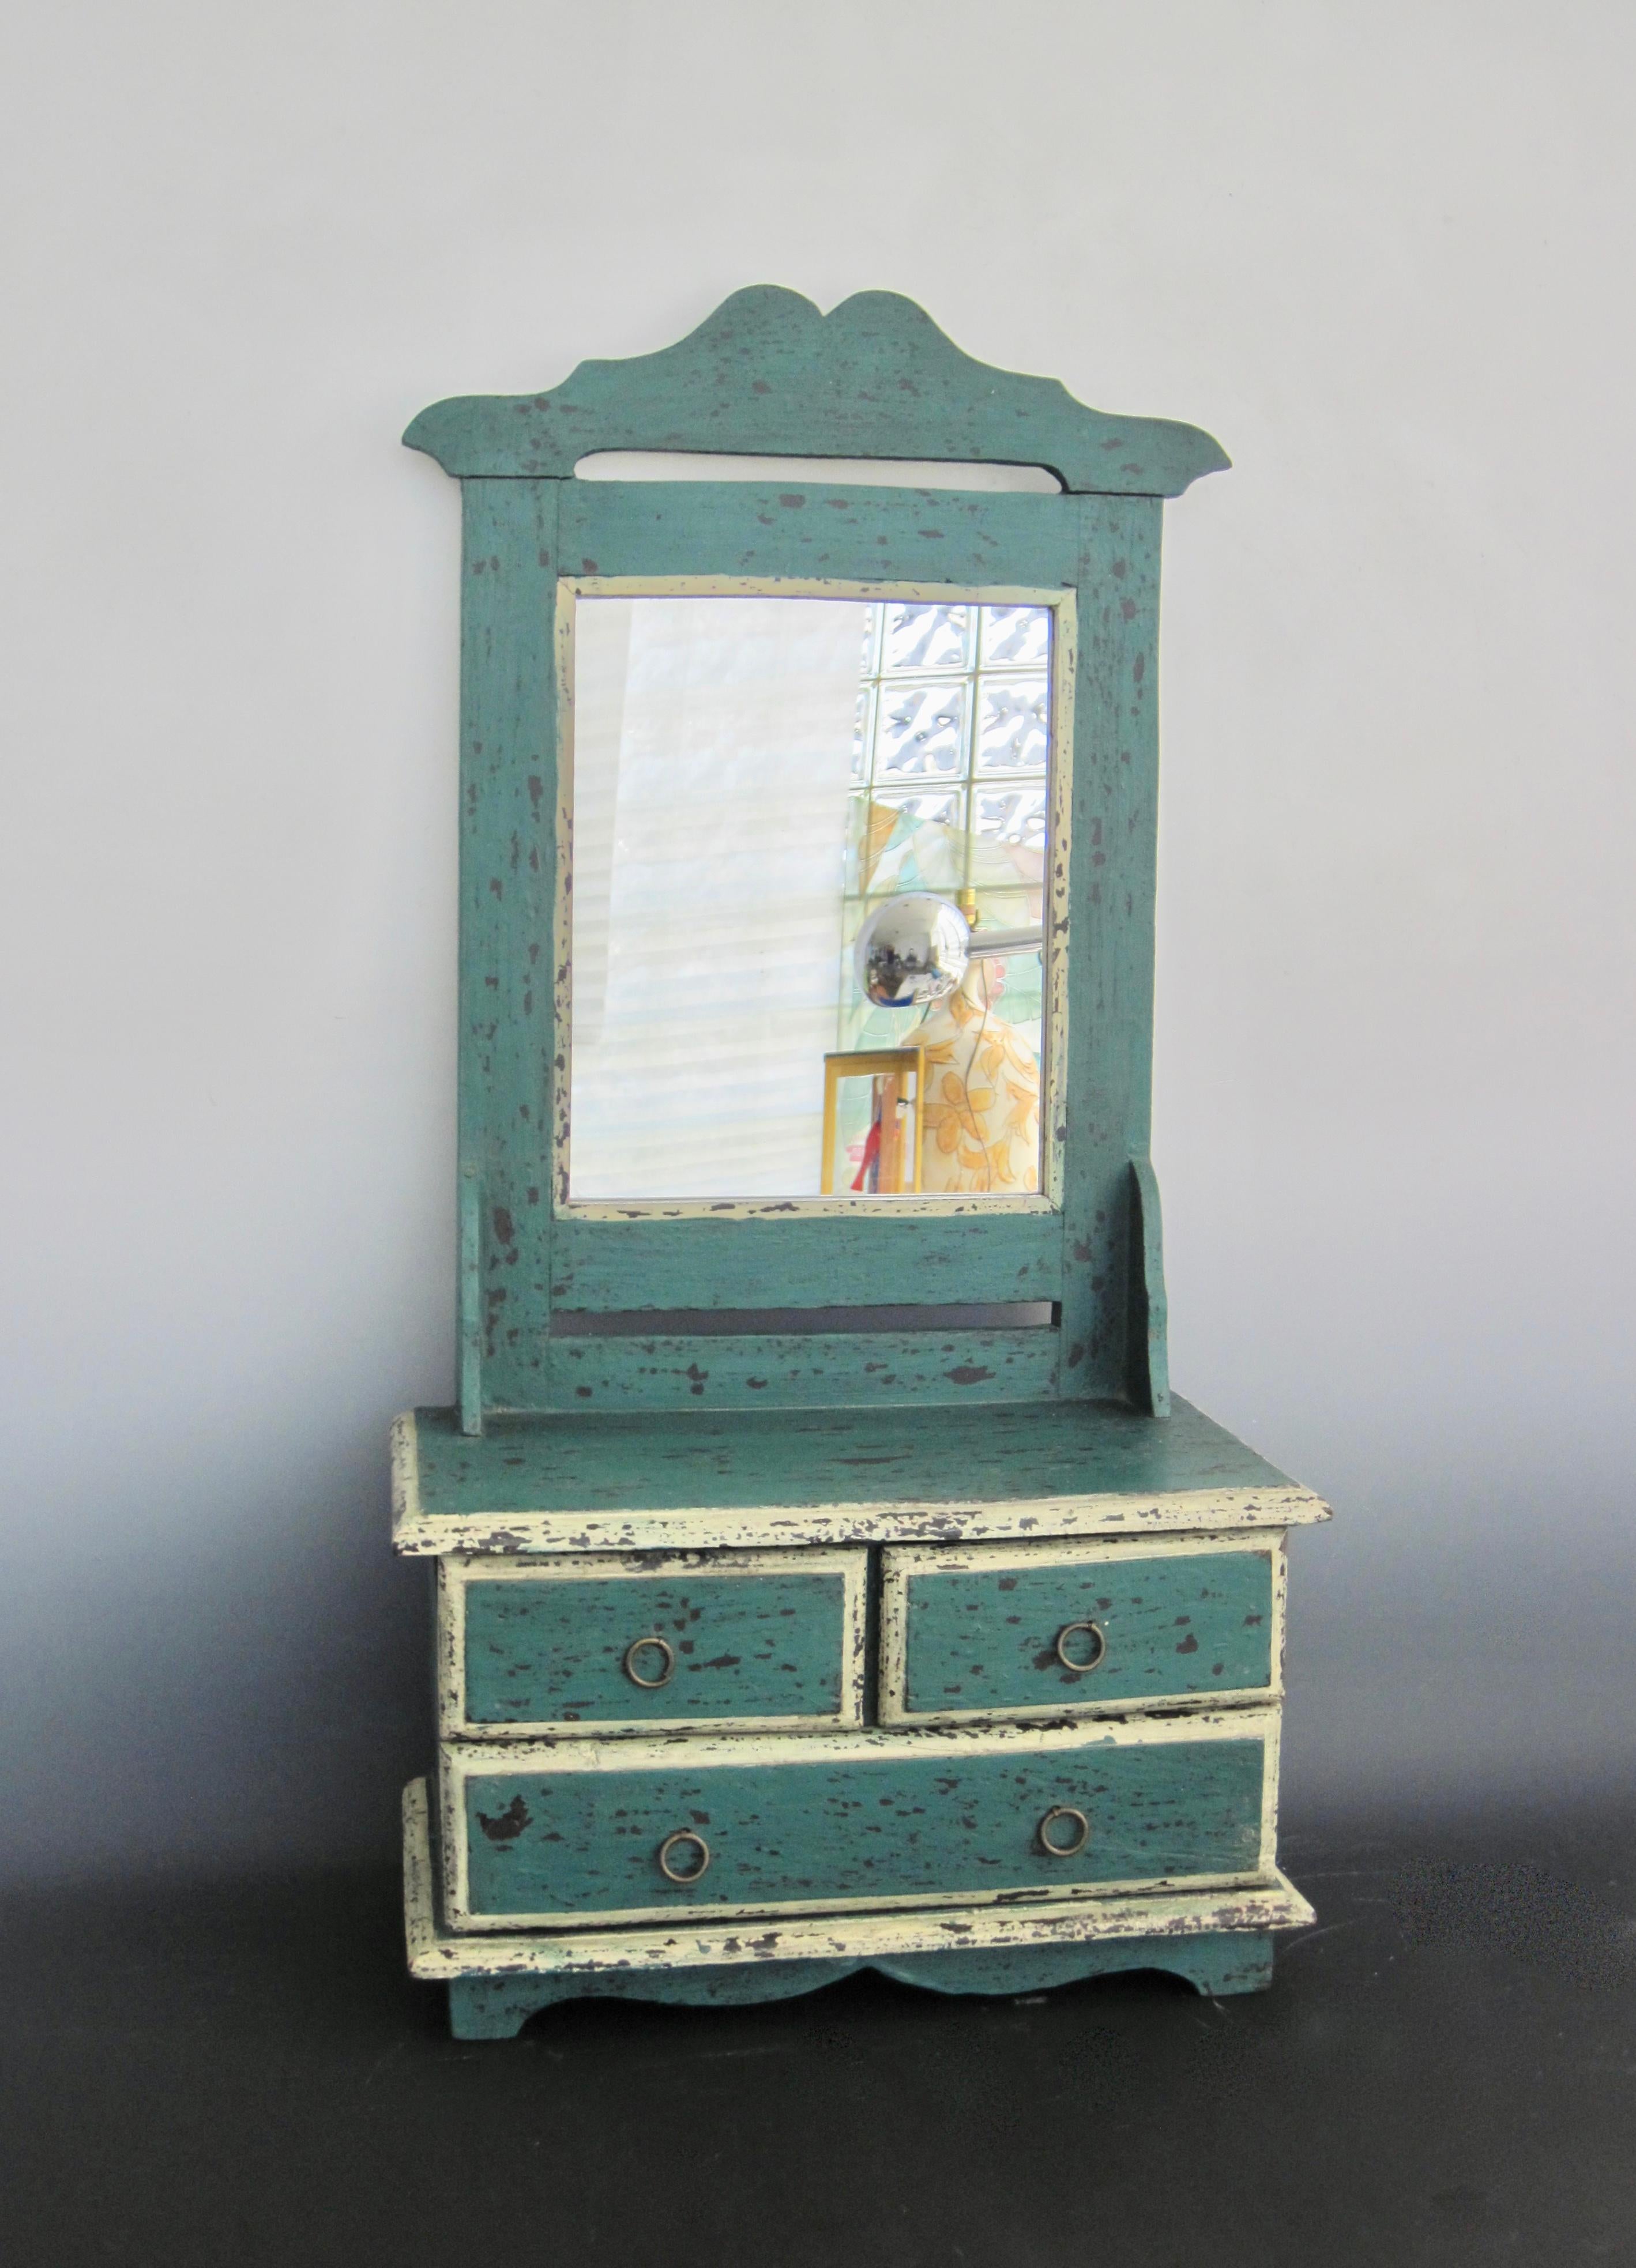 Early 20th century Folk Art dressing table mirror in the original paint - teal green over black with white trim. The distressed surface paint reveals the black underneath creating a textural look and feel. Three drawers with round brass pulls